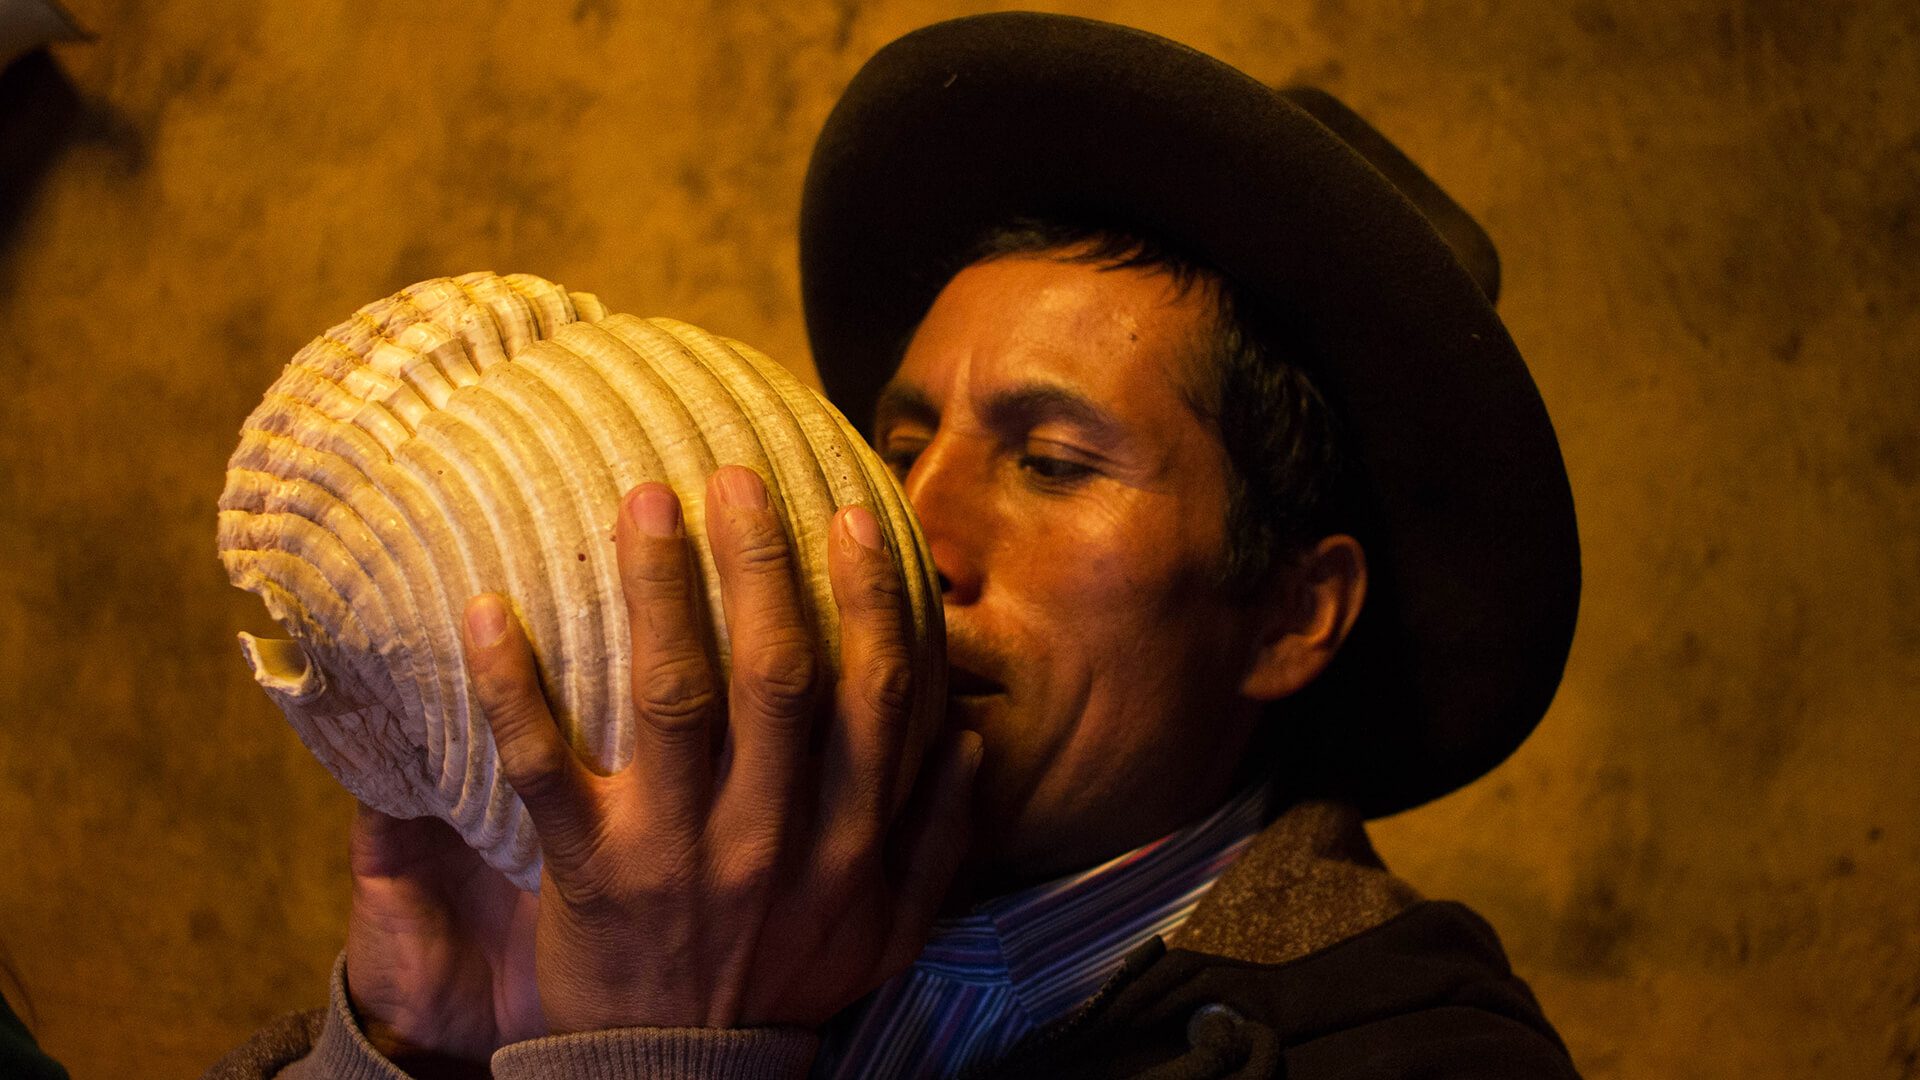 Pablo blowing a "pututo" marine shell used as a trumpet by the ancient Peruvians | RESPONSible Travel Peru